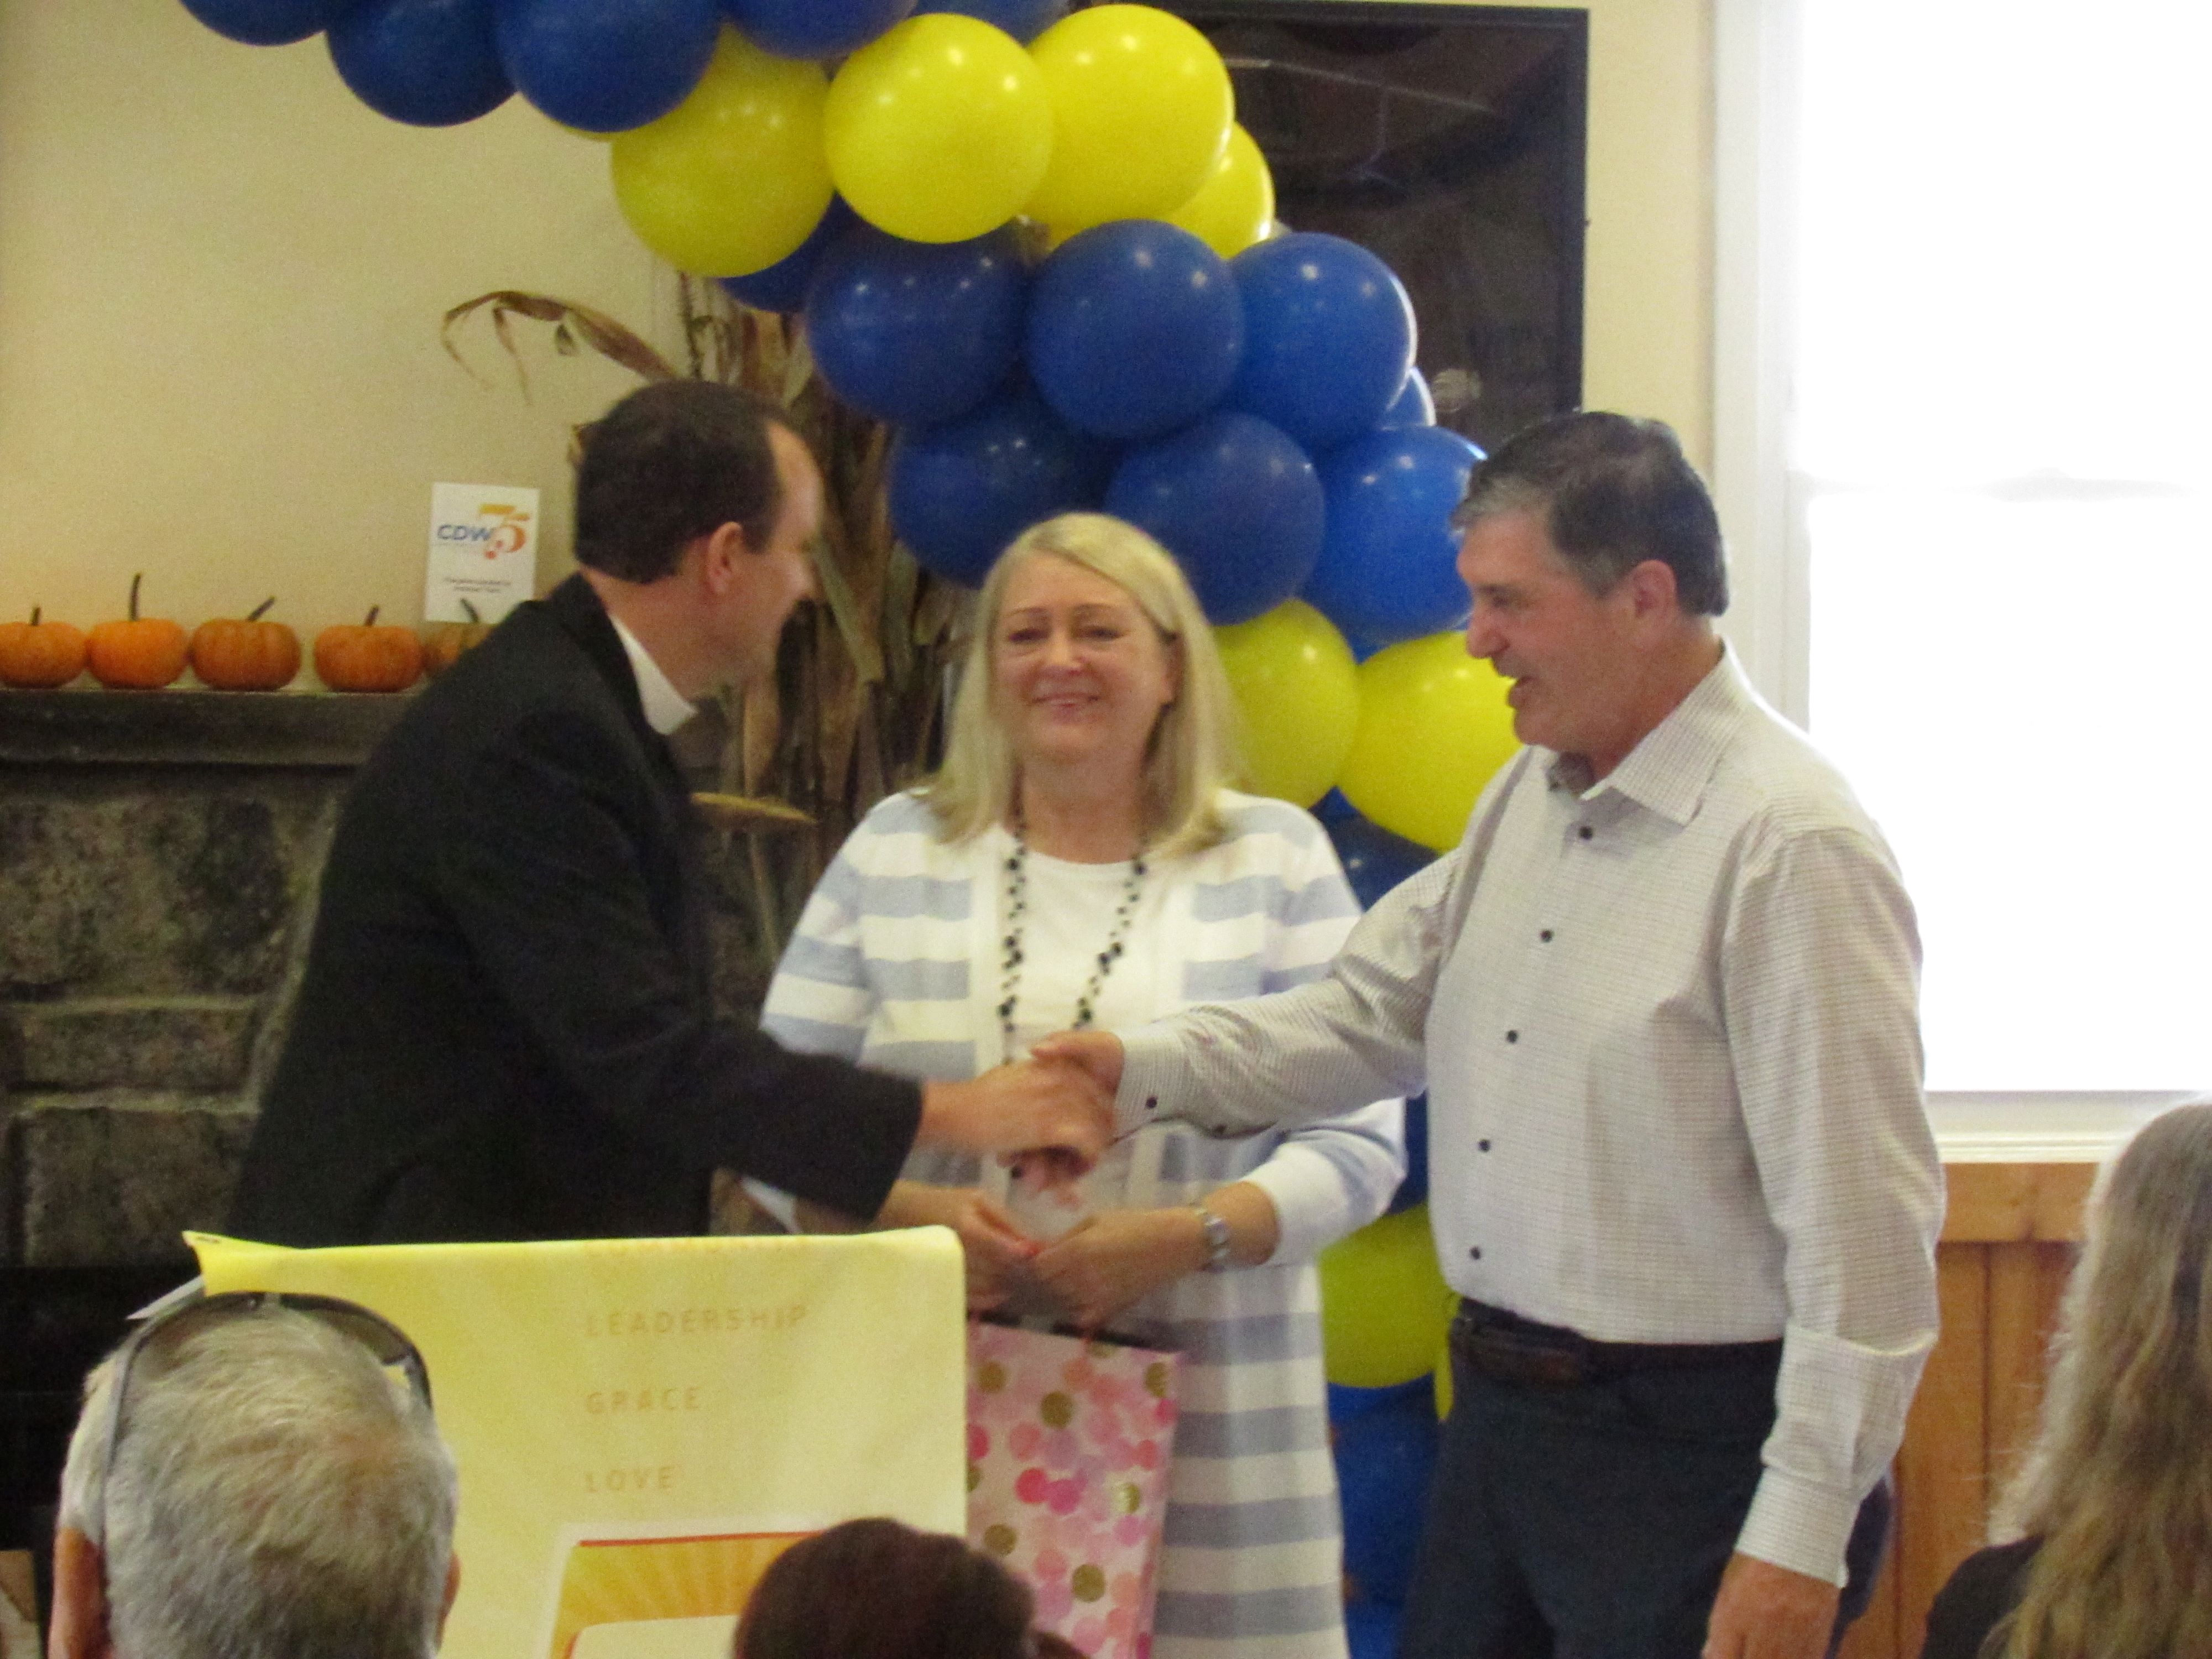 Debbie Davis and her husband Jim were honored for their 50 years of marriage and thanked for their continued efforts